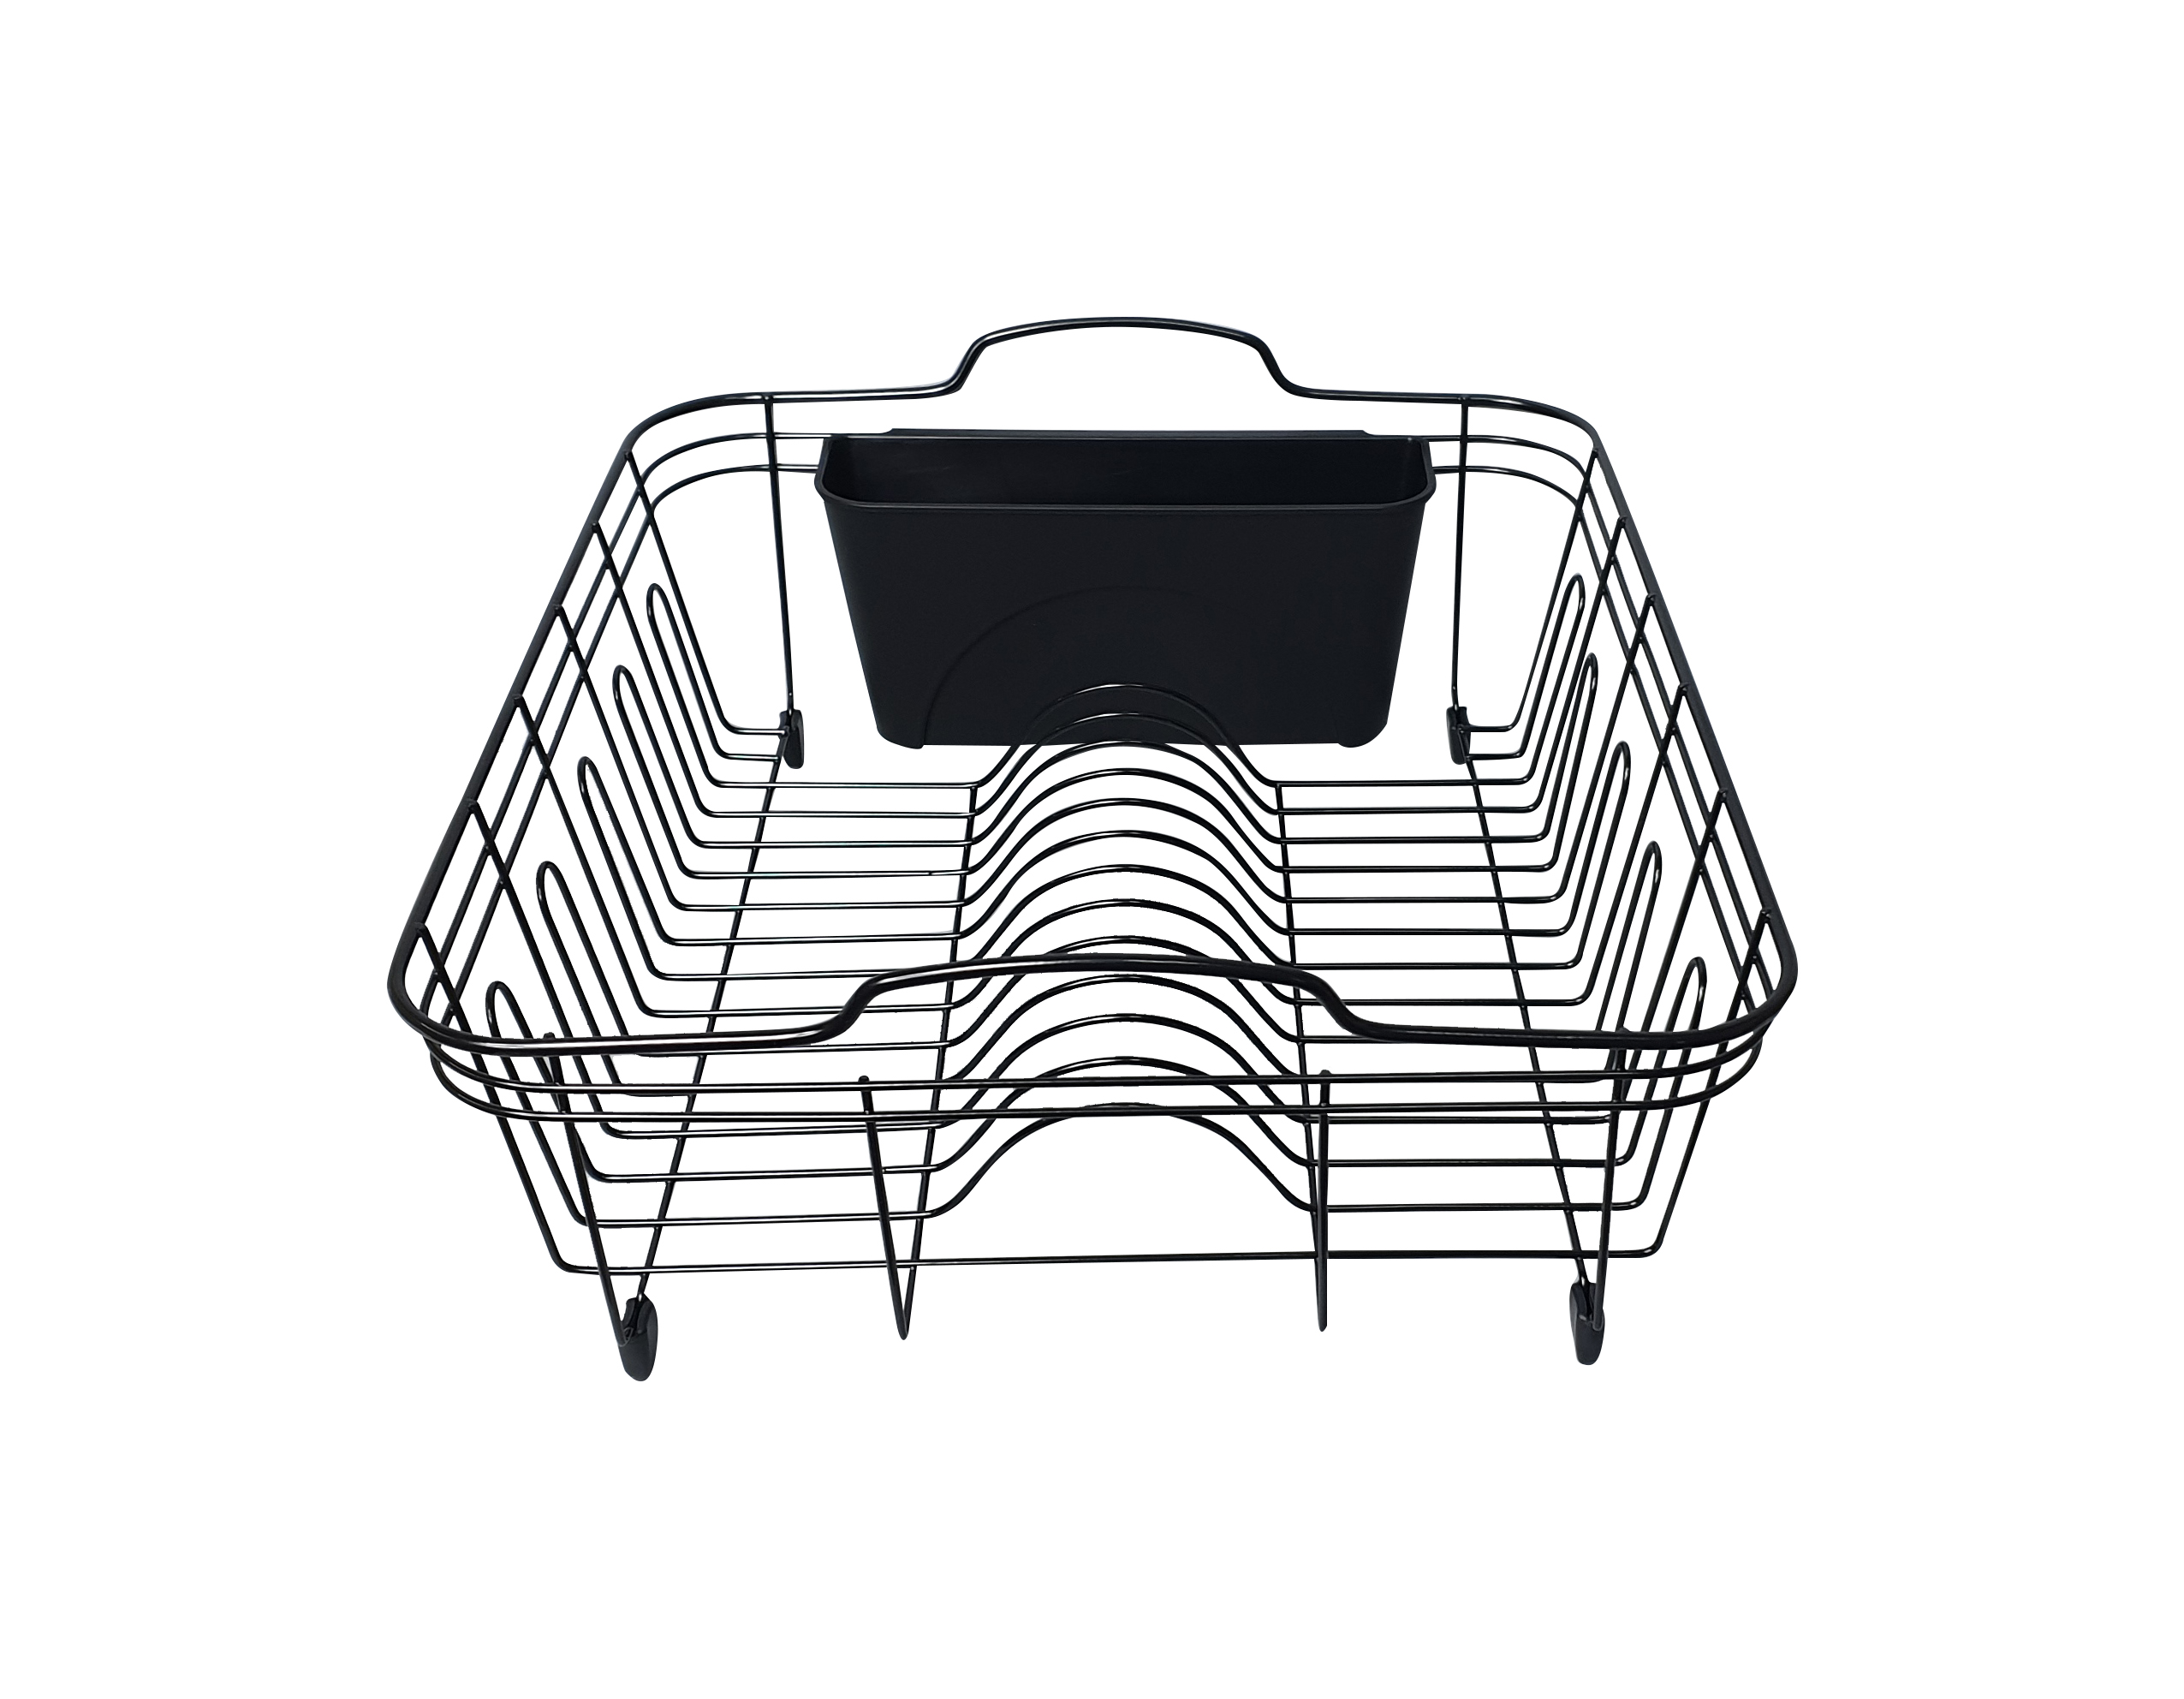 Black Dish Drainer with Cutlery Basket